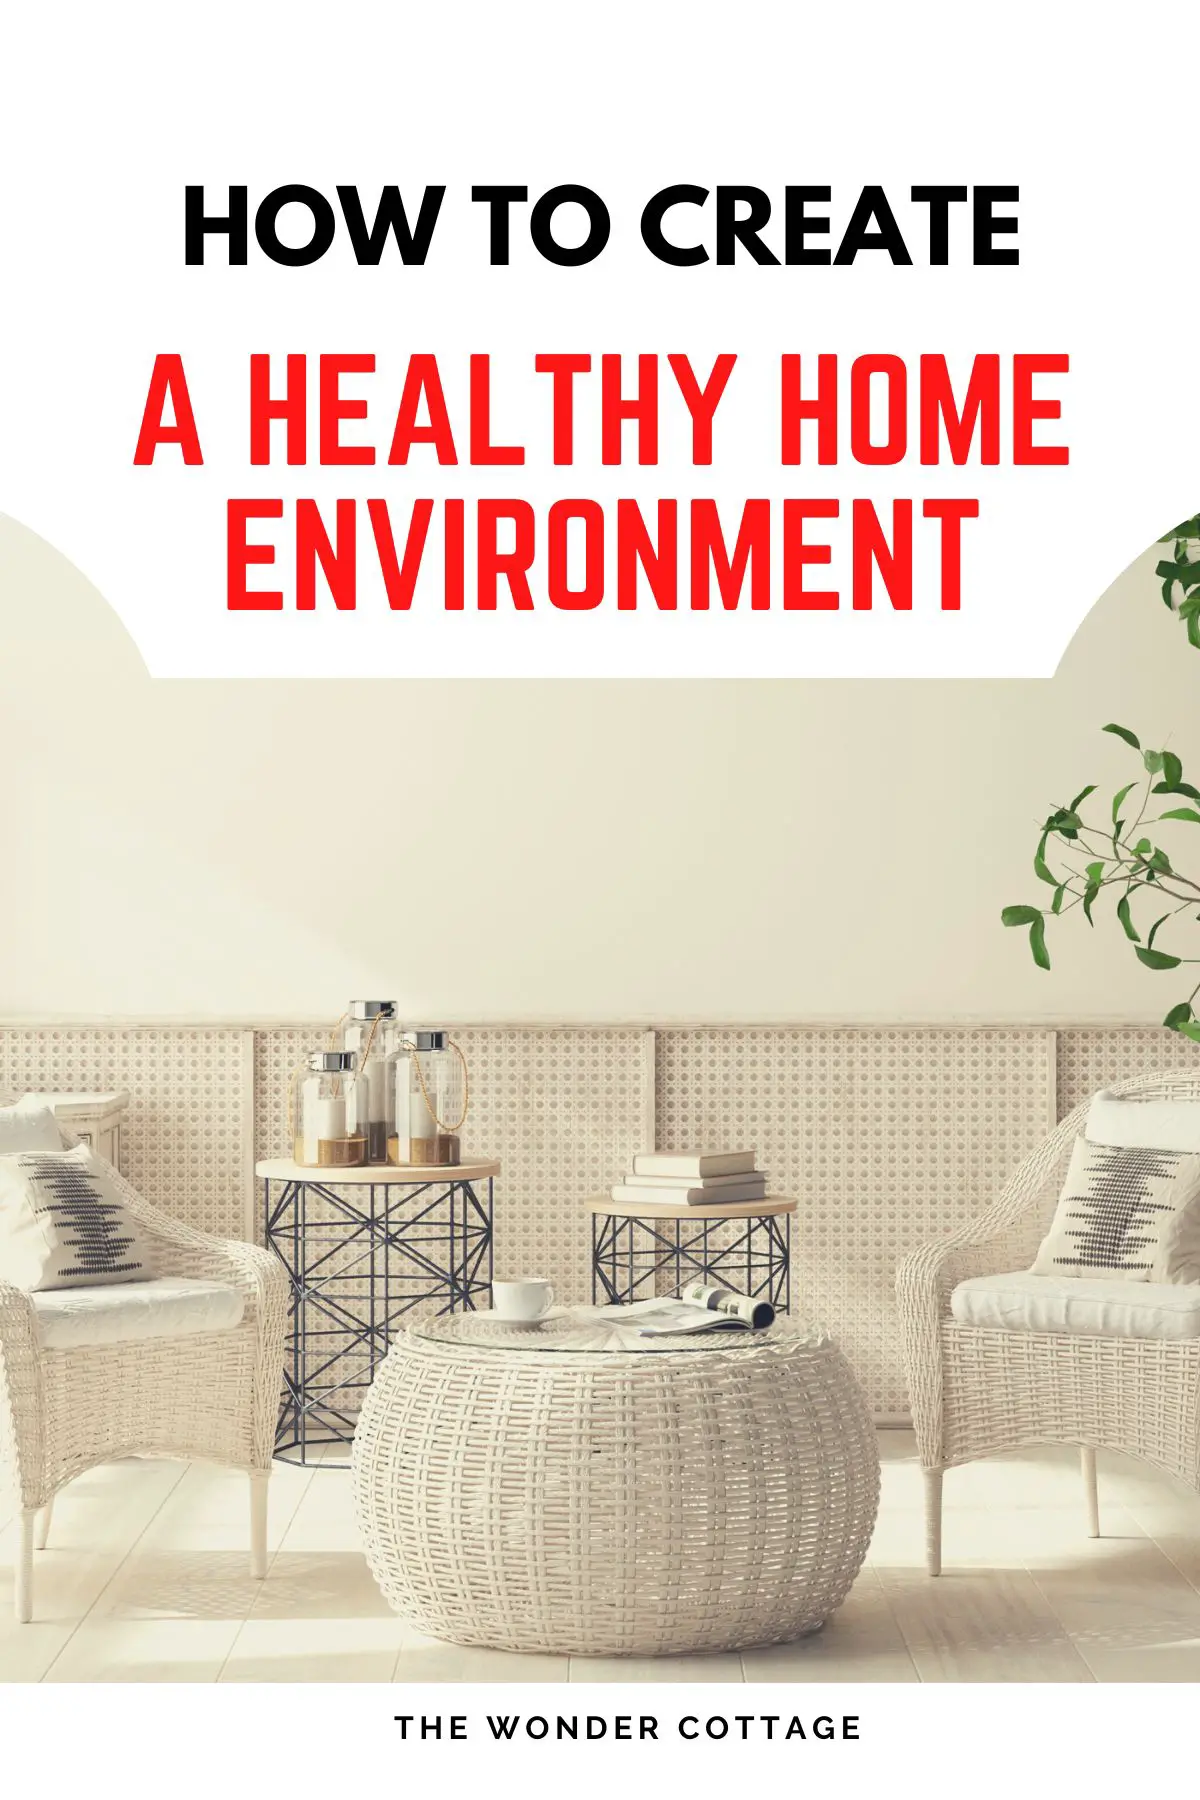 How to create a healthy home environment